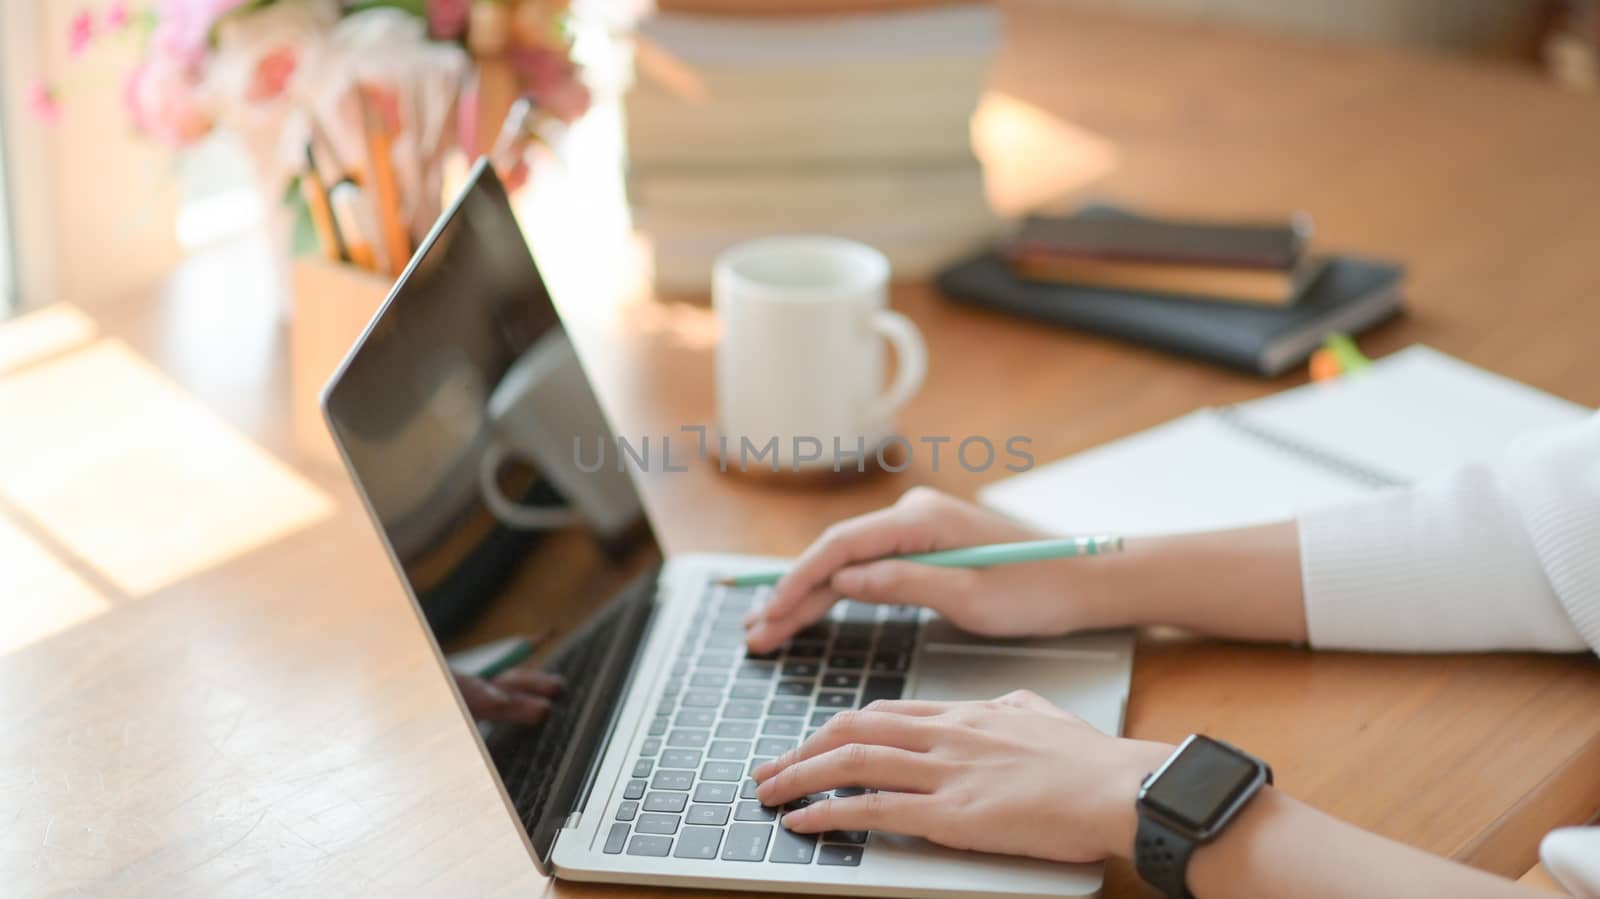 Close up, Young girl's hand is using a laptop on a wooden desk i by poungsaed